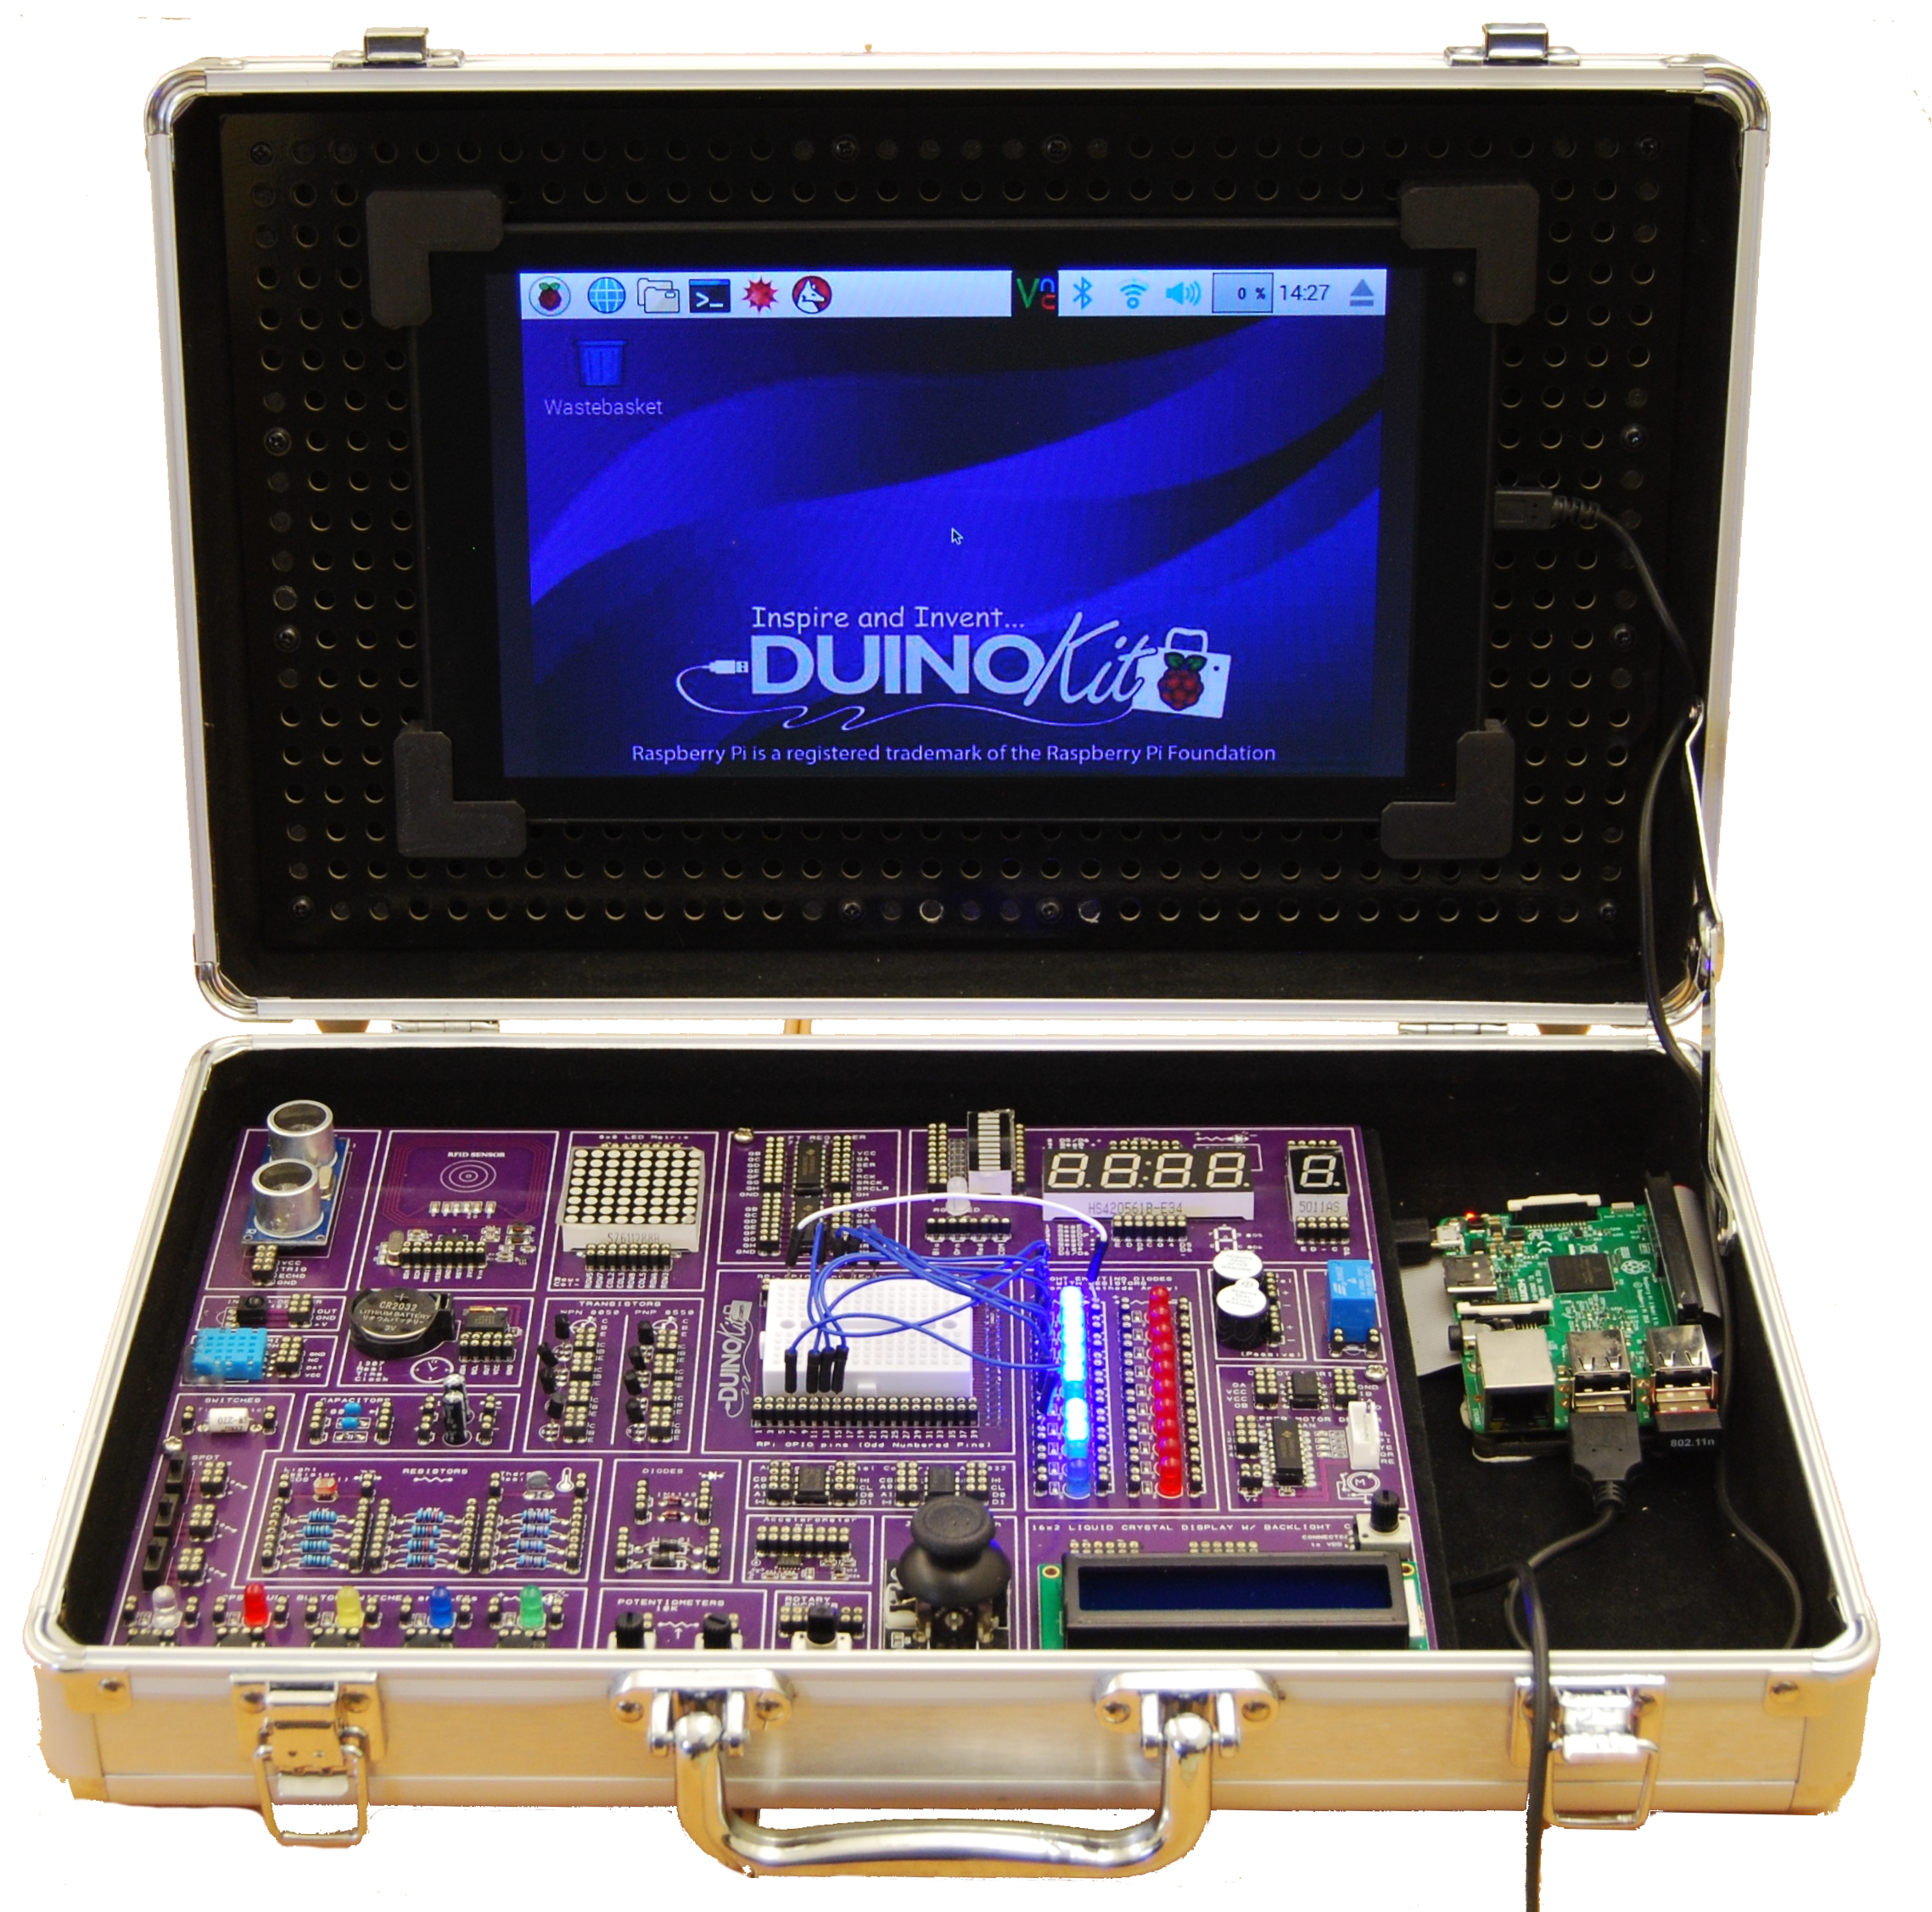 Learn Arduino Electronics and Programming with a DuinoKit